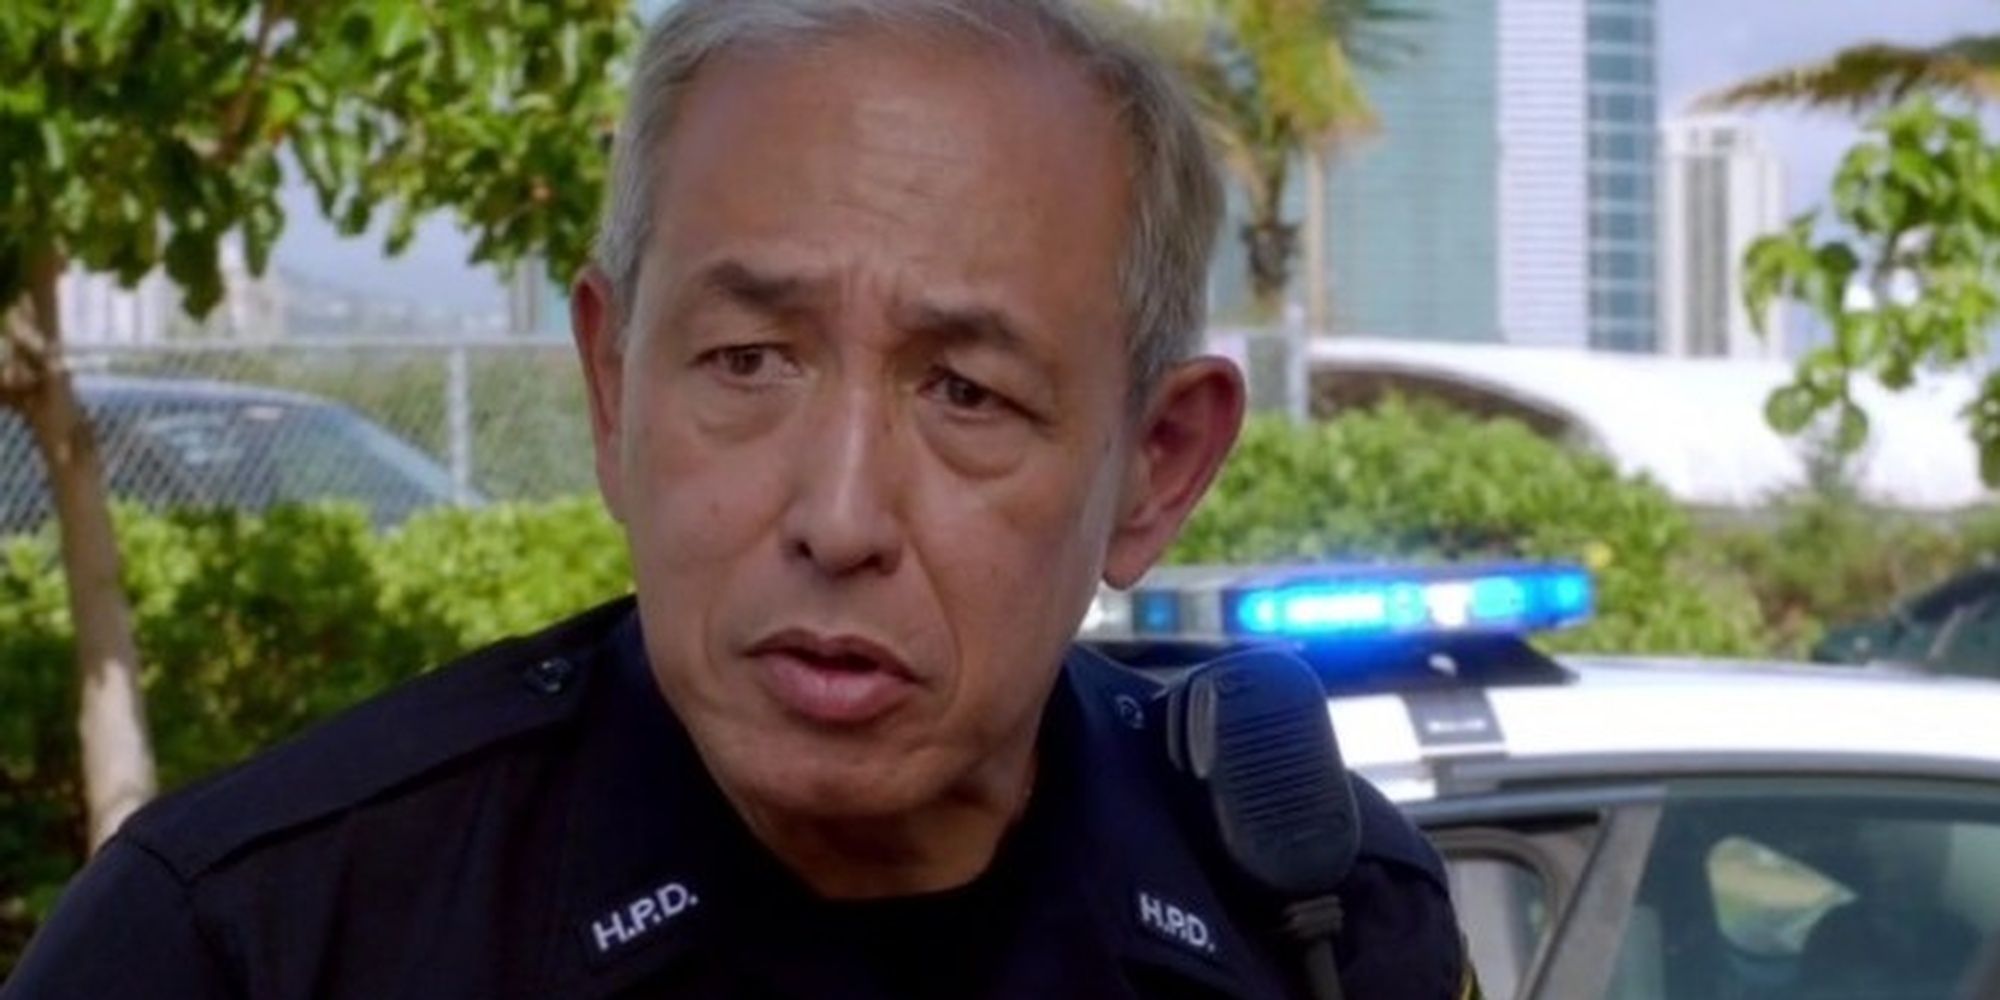 Hawaii Five0 (The Original Show) 10 Facts You Didnt Know About The Main Characters